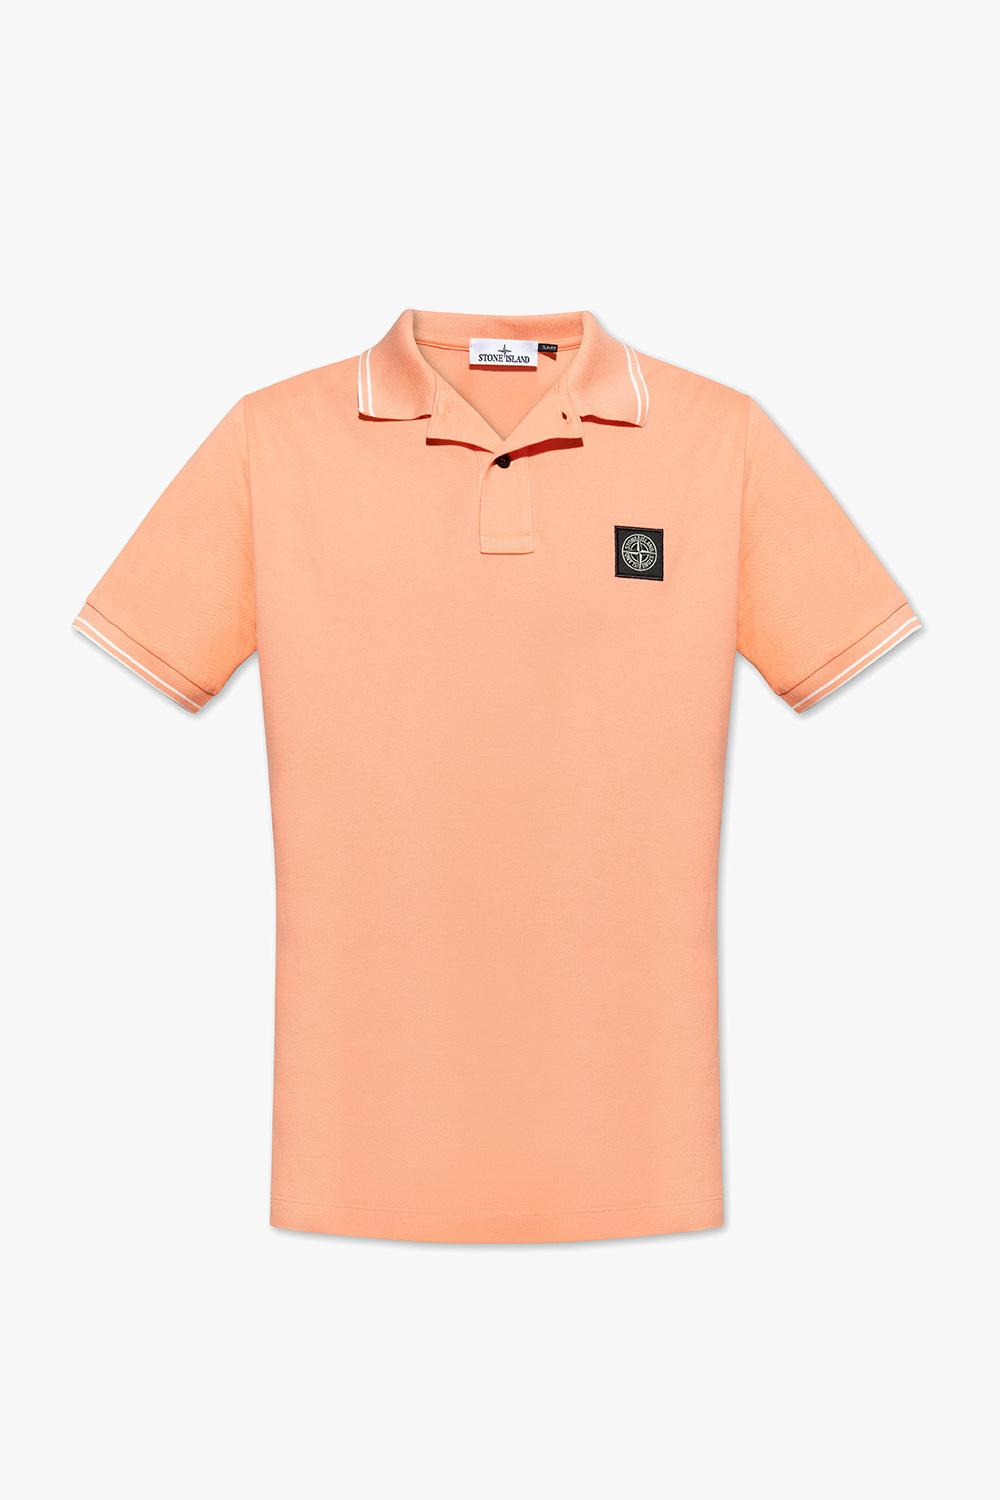 Stone Island Cotton Polo Shirt in Pink for Men | Lyst